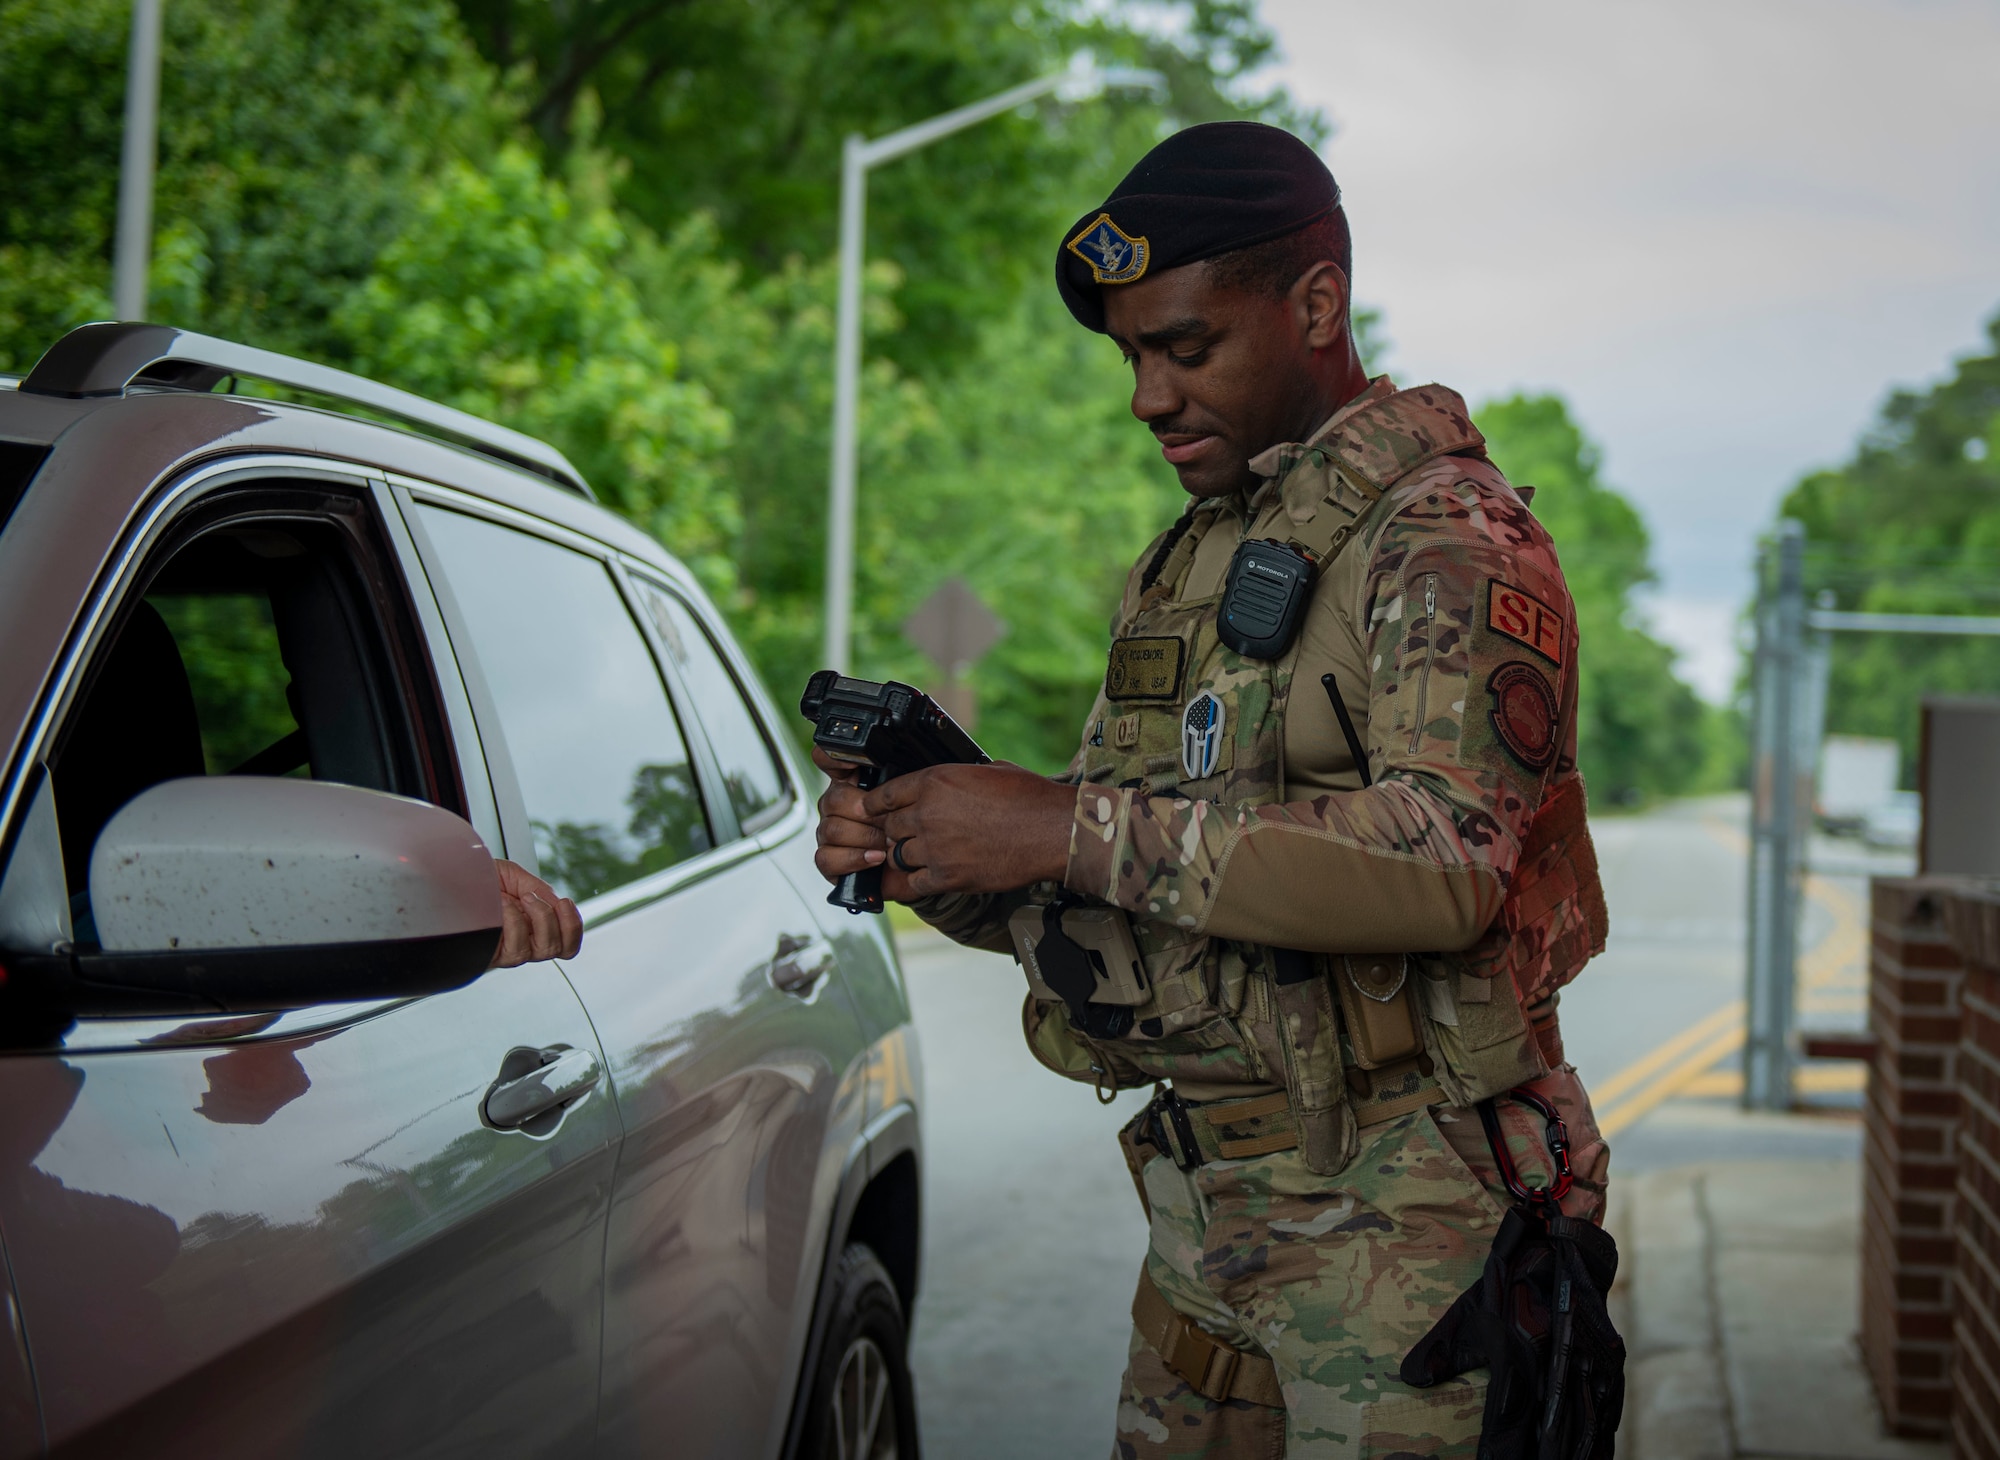 Staff Sgt. Marquez Roquemore, 4th Security Force Squadron patrolman, checks an individual's identification card at Seymour Johnson Air Force Base, North Carolina, May 12, 2022. The 4th SFS mission is to provide force protection and ensure operational readiness. (U.S. Air Force photo by Airman 1st Class Sabrina Fuller)